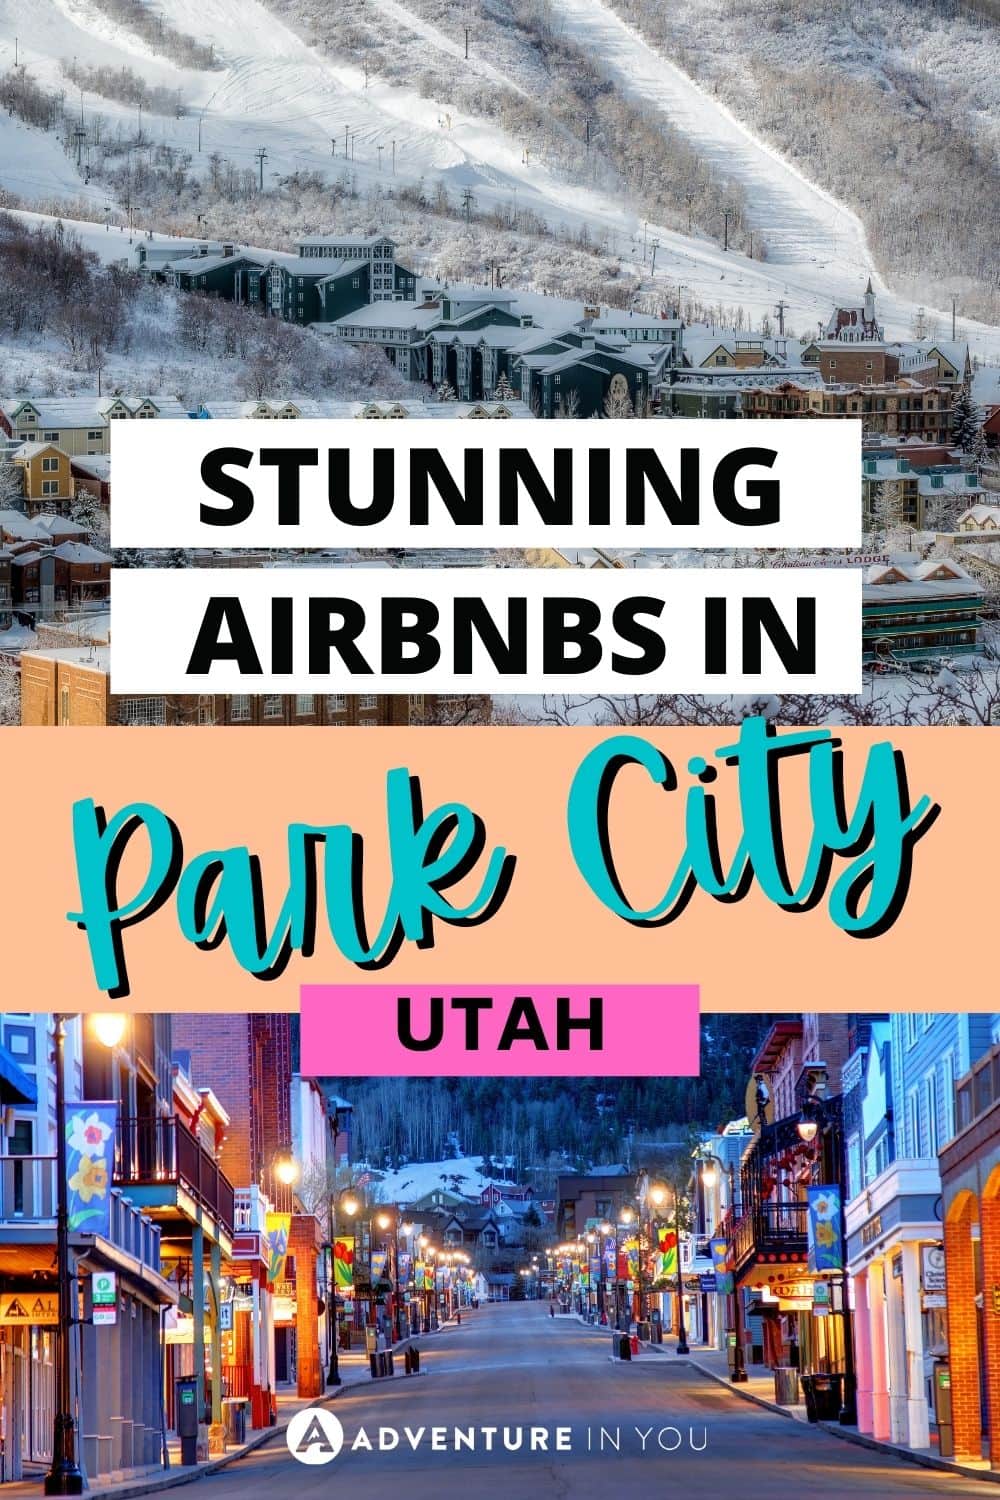 Airbnbs in Park City | Looking for the best Airbnbs in Park City Click here to see our top picks. #usa #utah #parkcity #wheretostayinparkcity